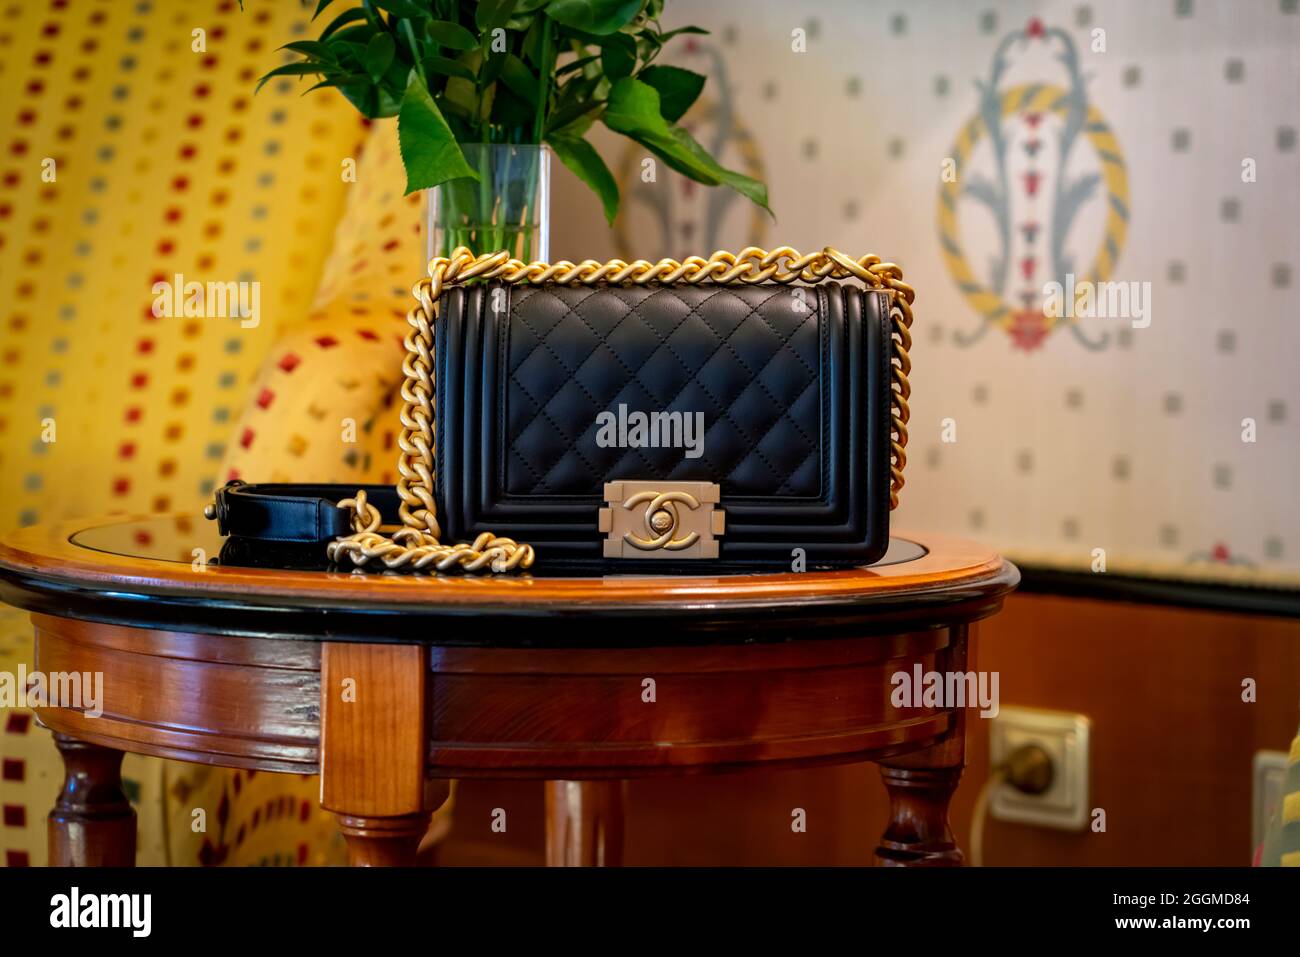 Chanel Bag High Resolution Stock Photography and Images - Alamy